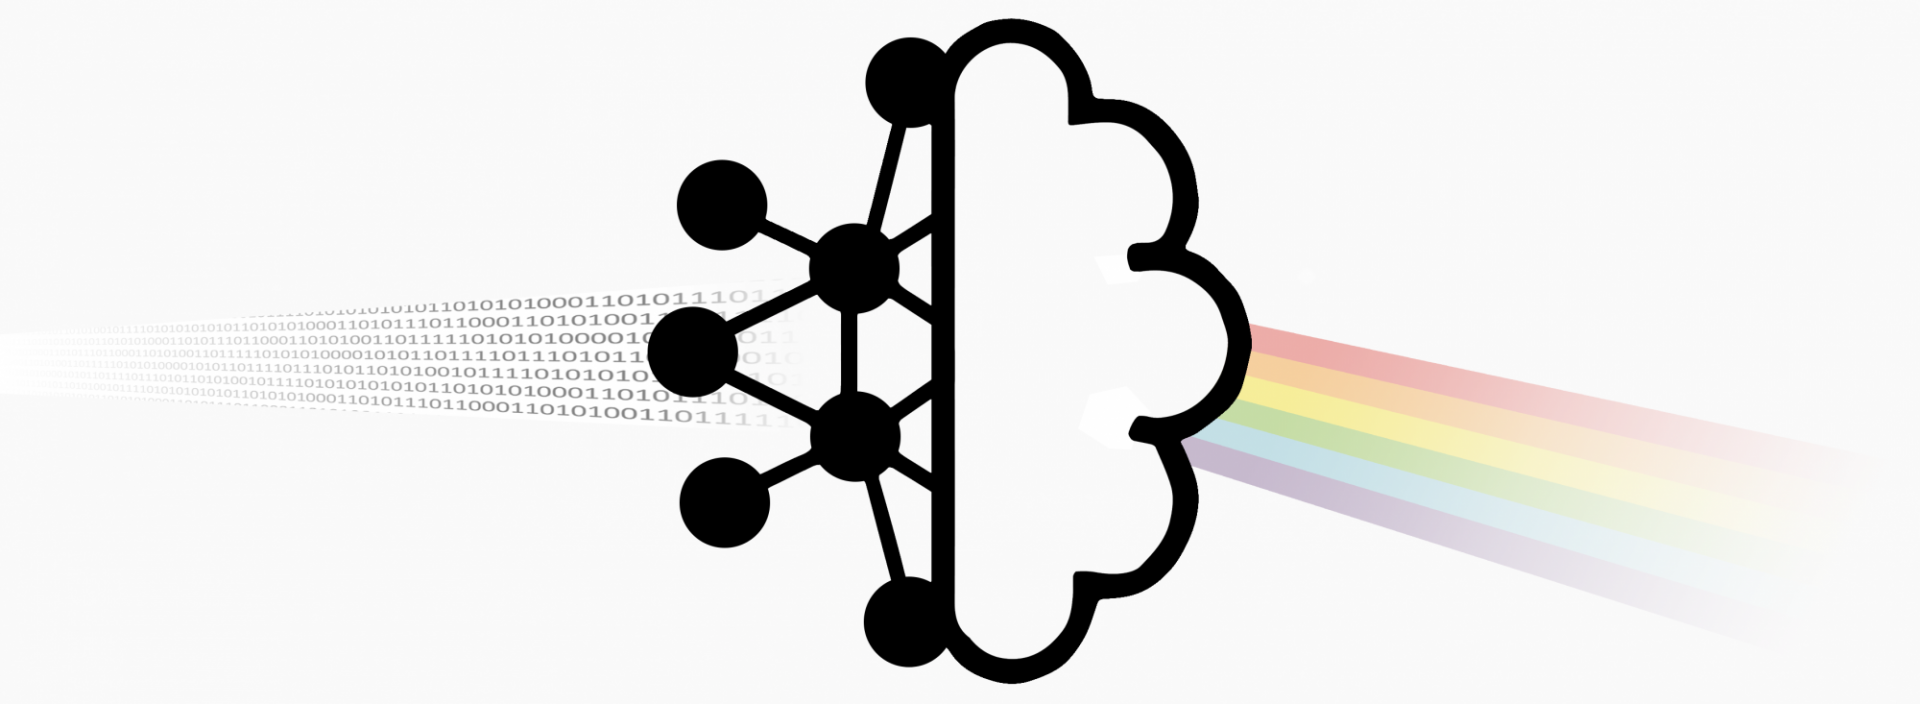 graphic of binary code entering a brain and leaving as a rainbow.  